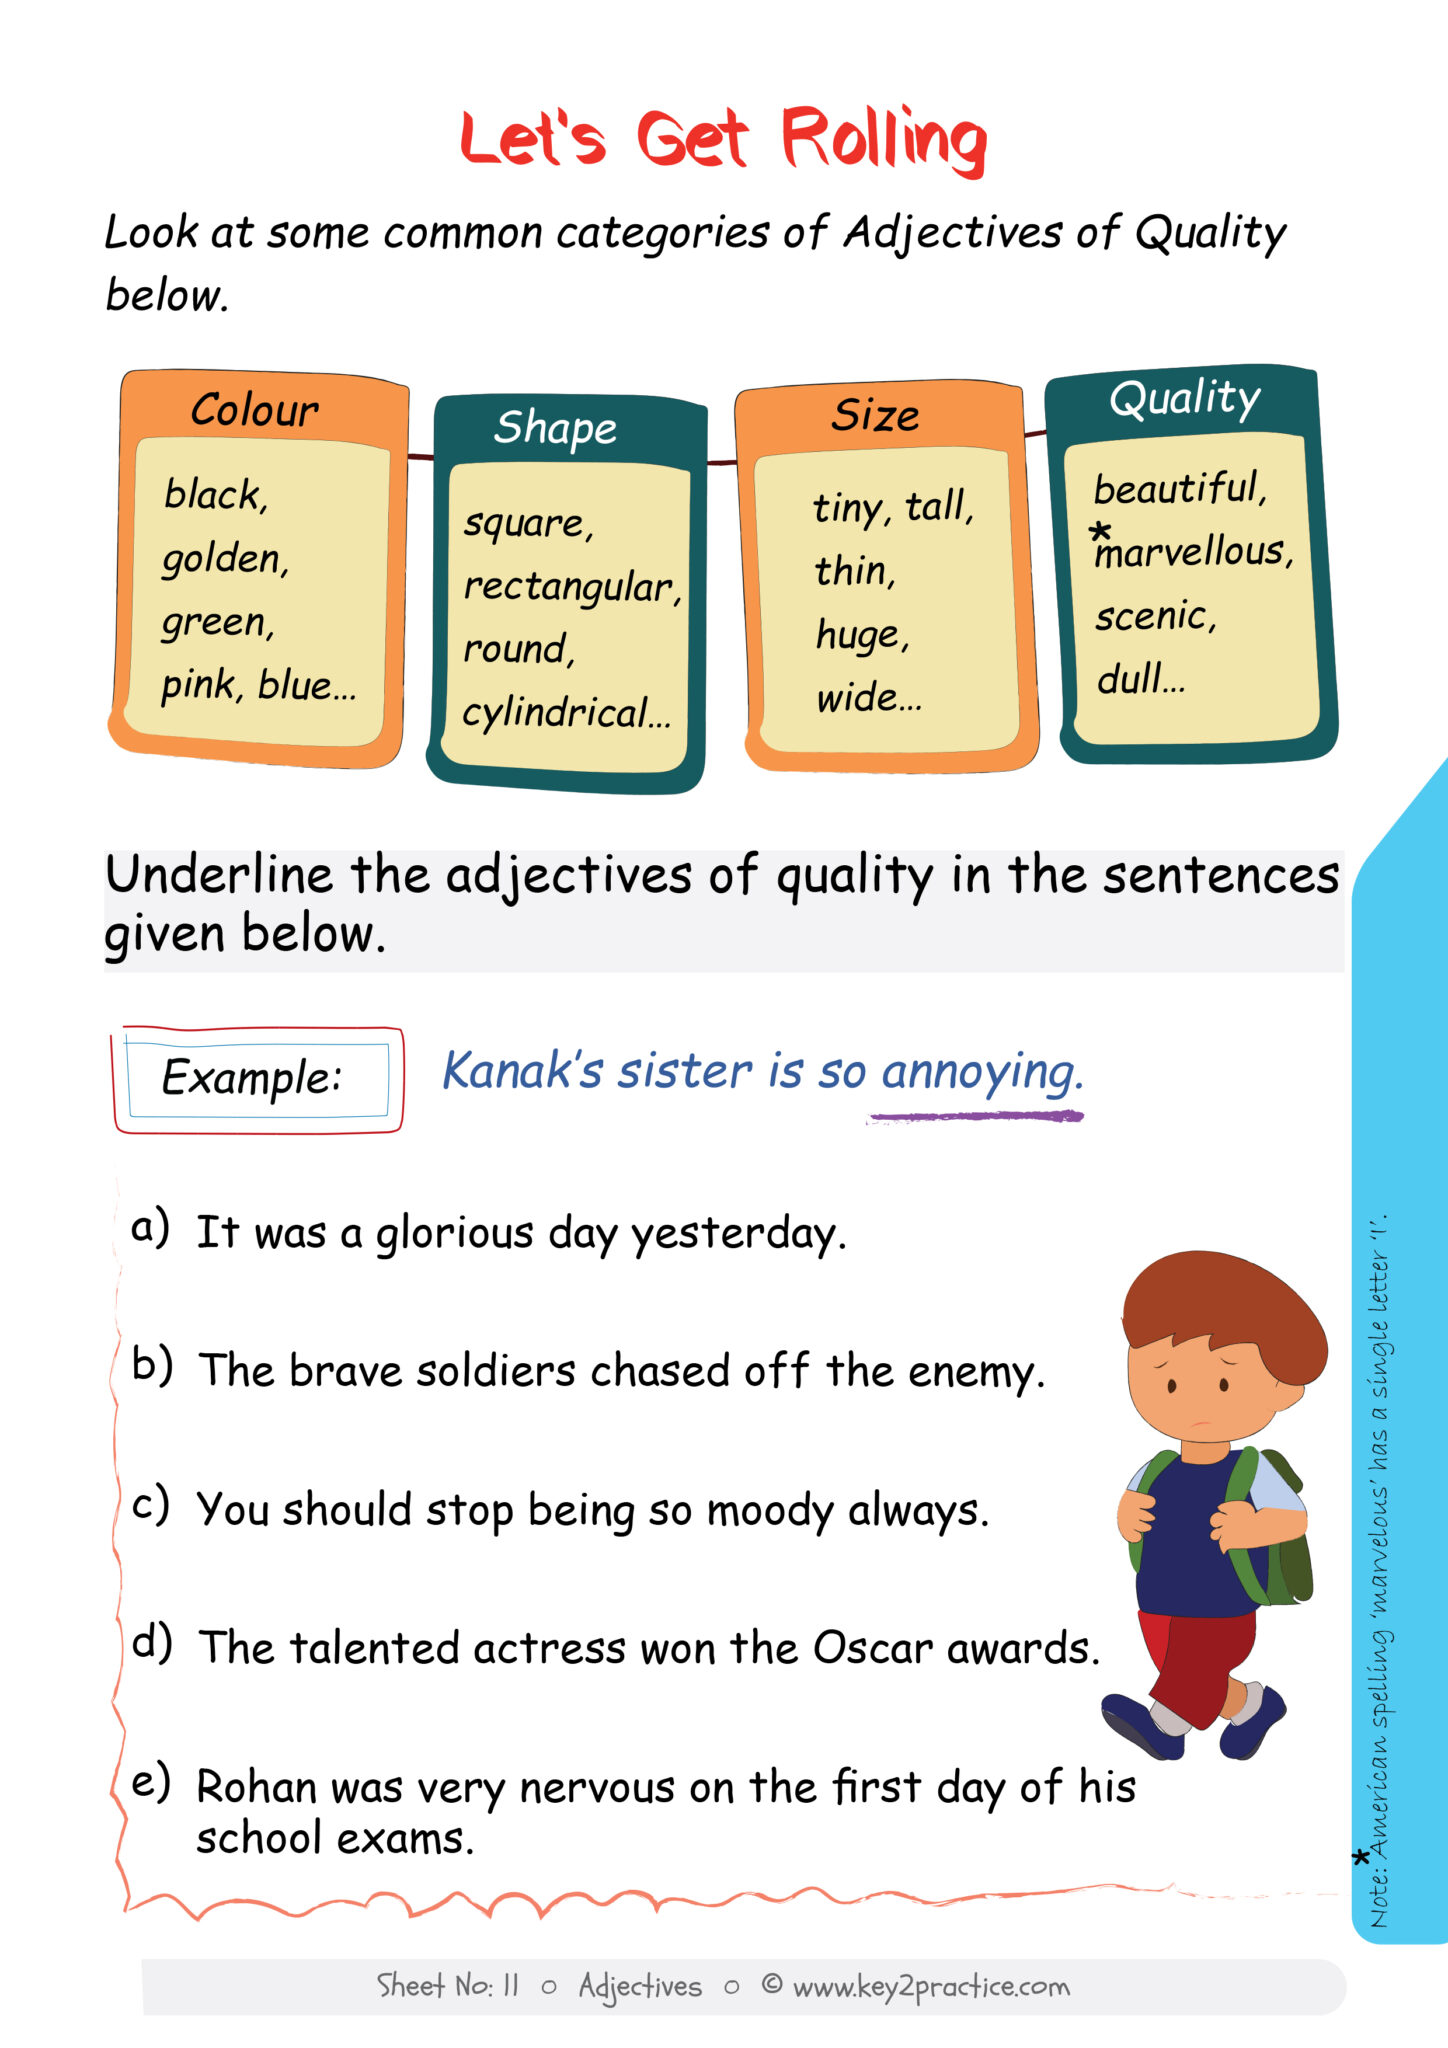 Order Of Adjectives Worksheet With Answers